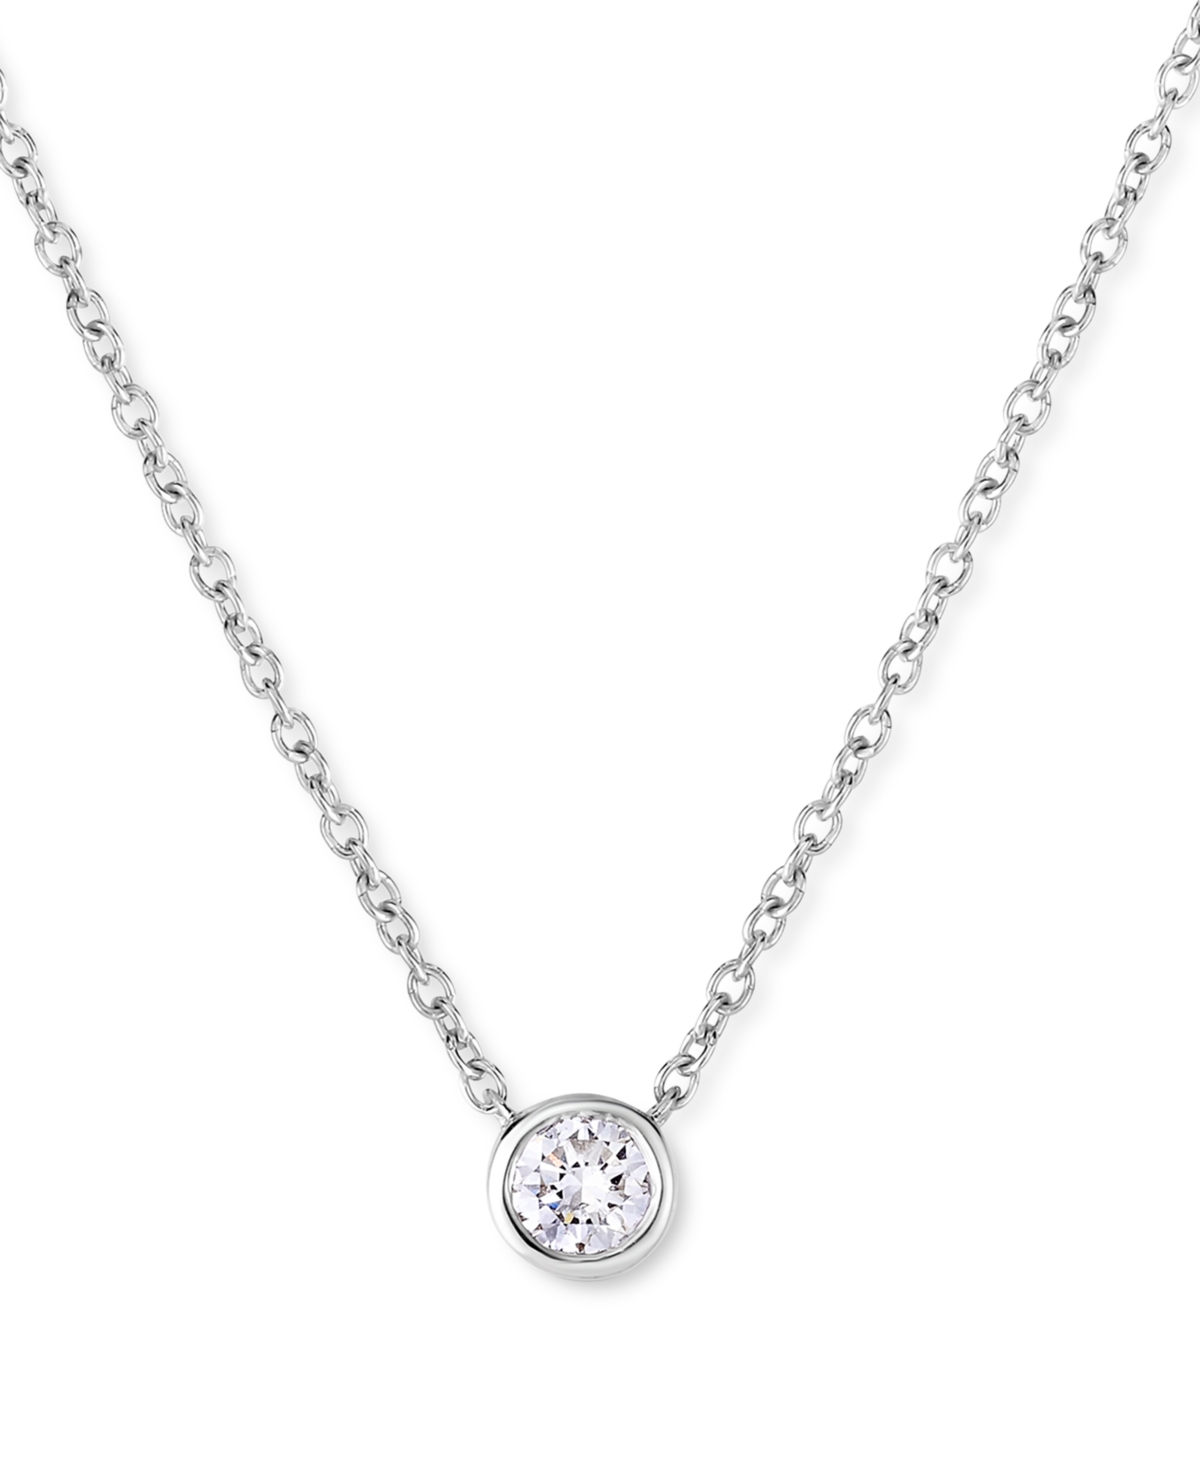 FOREVER GROWN DIAMONDS LAB-CREATED DIAMOND BEZEL SOLITAIRE PENDANT NECKLACE (1/5 CT. T.W.) IN STERLING SILVER, 18" + 2" EXT